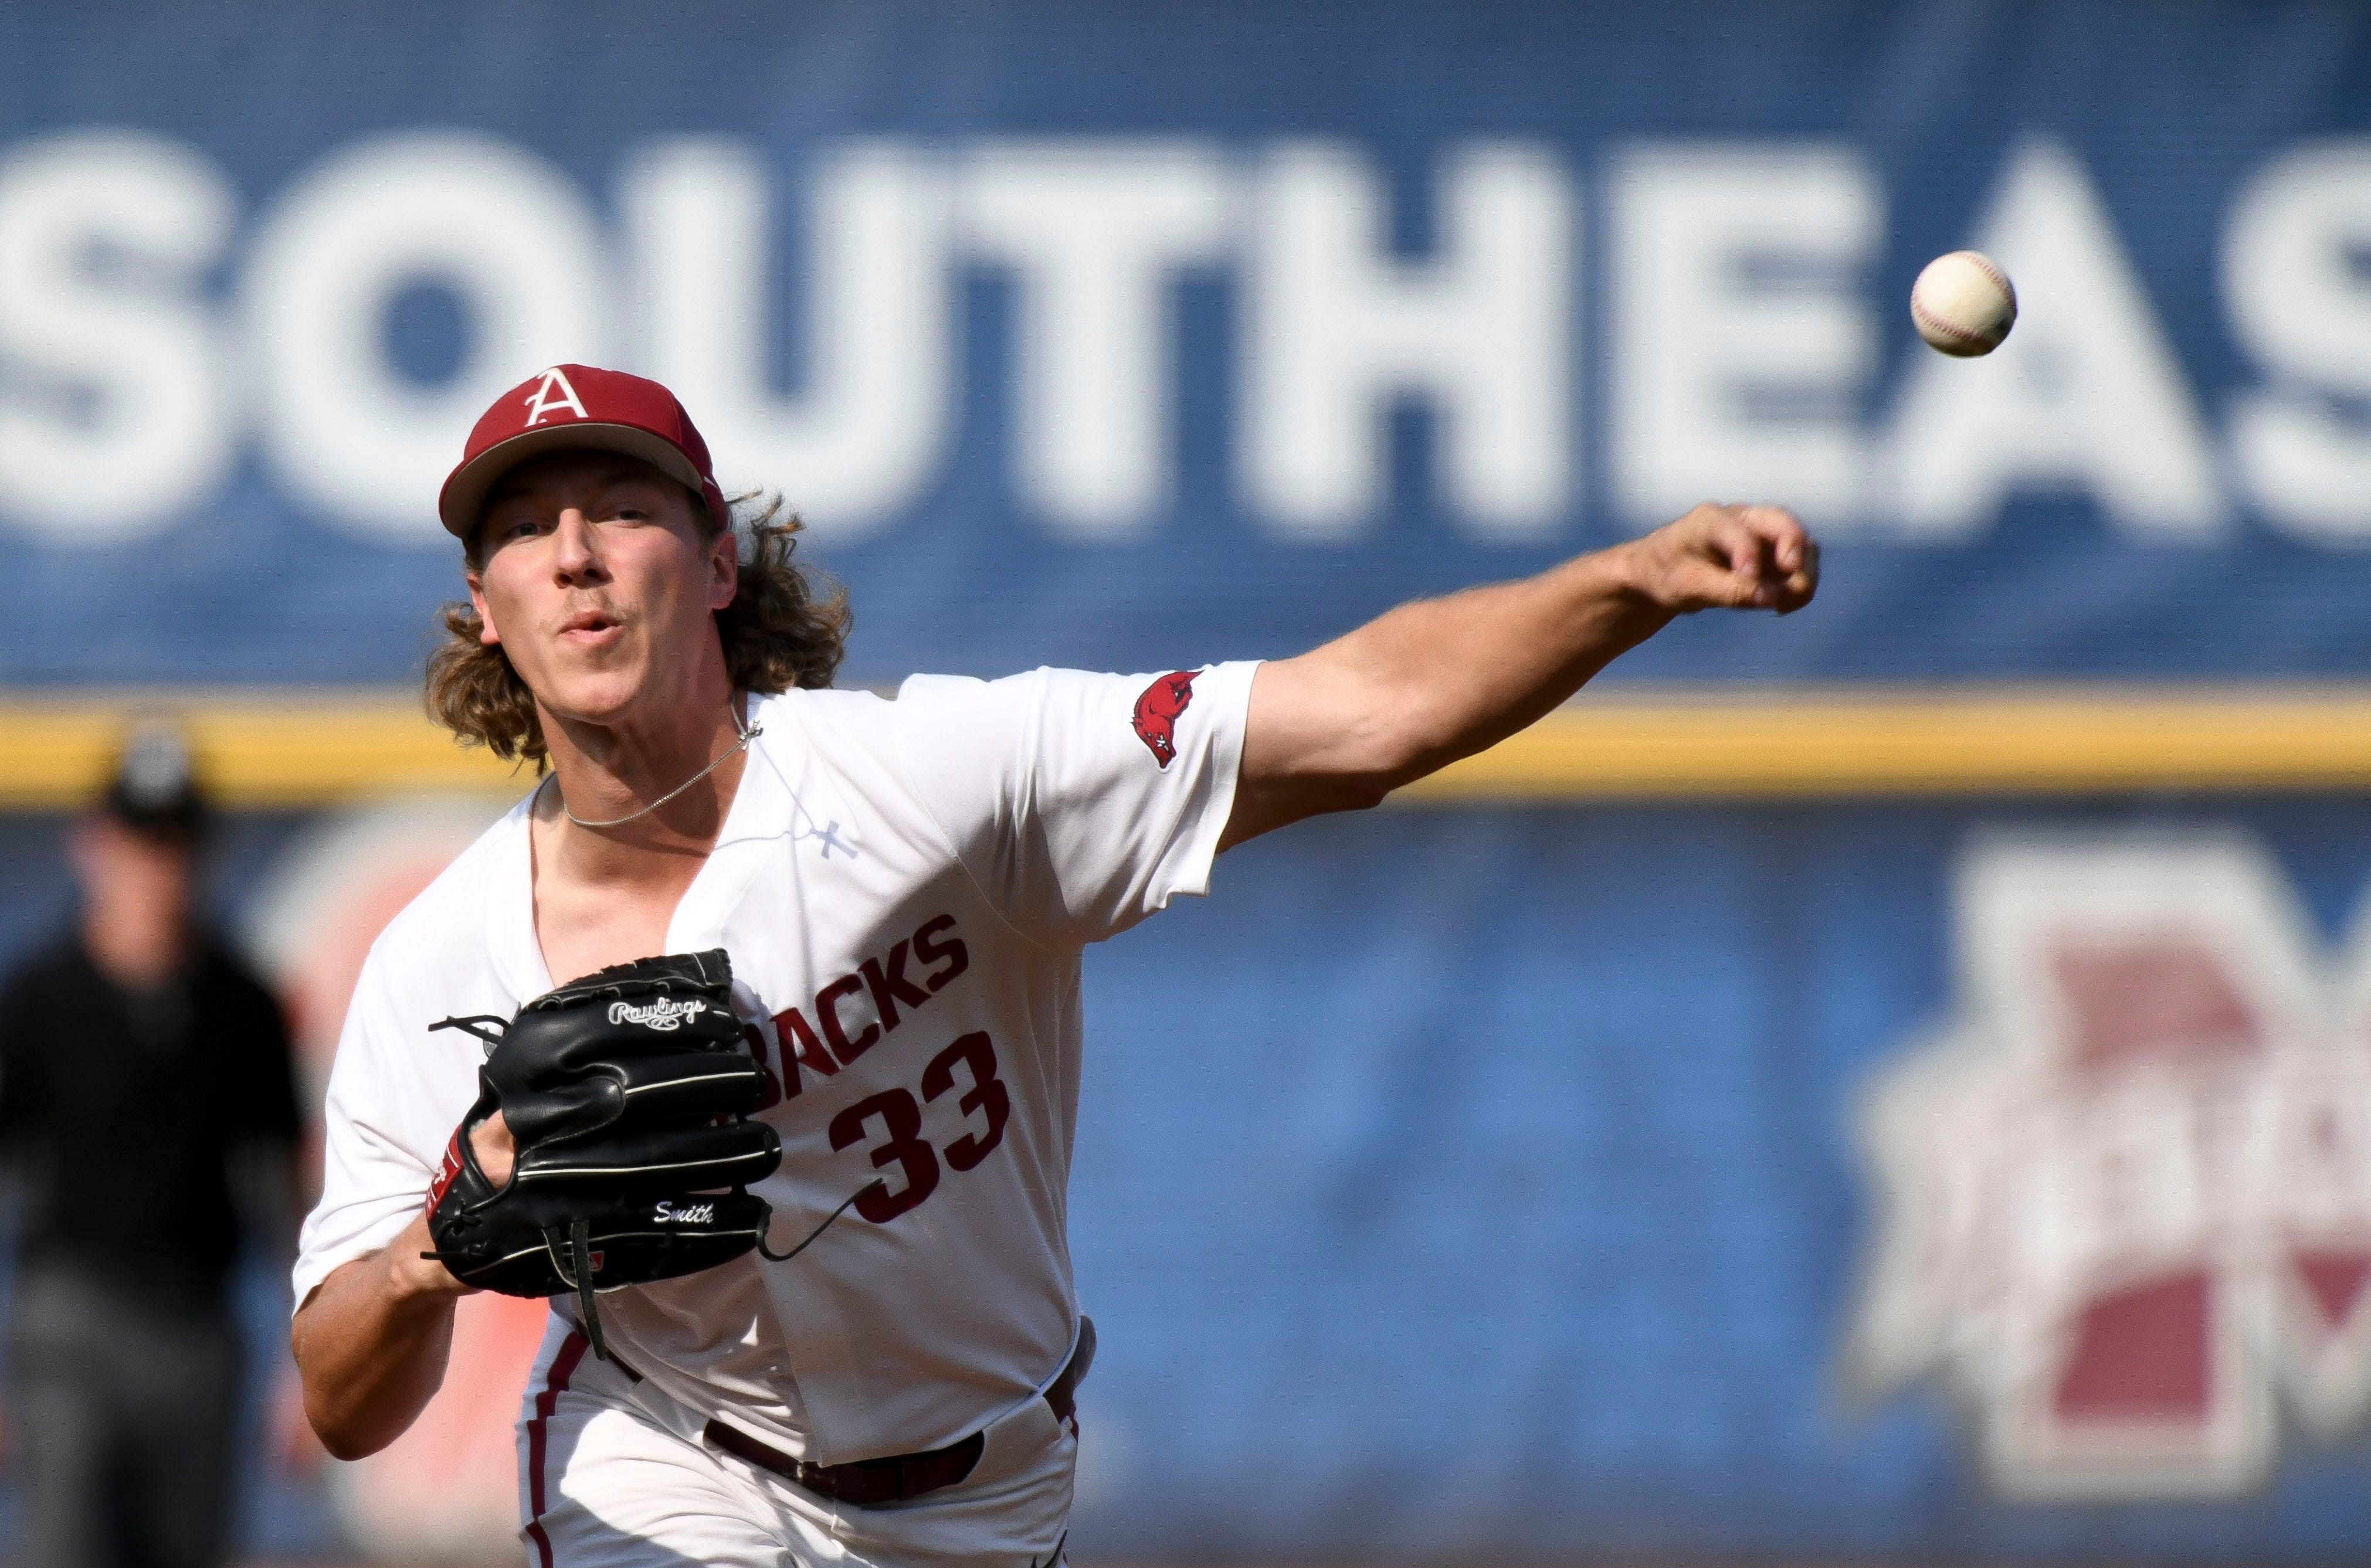 Hagen Smith is the top pitcher in the draft